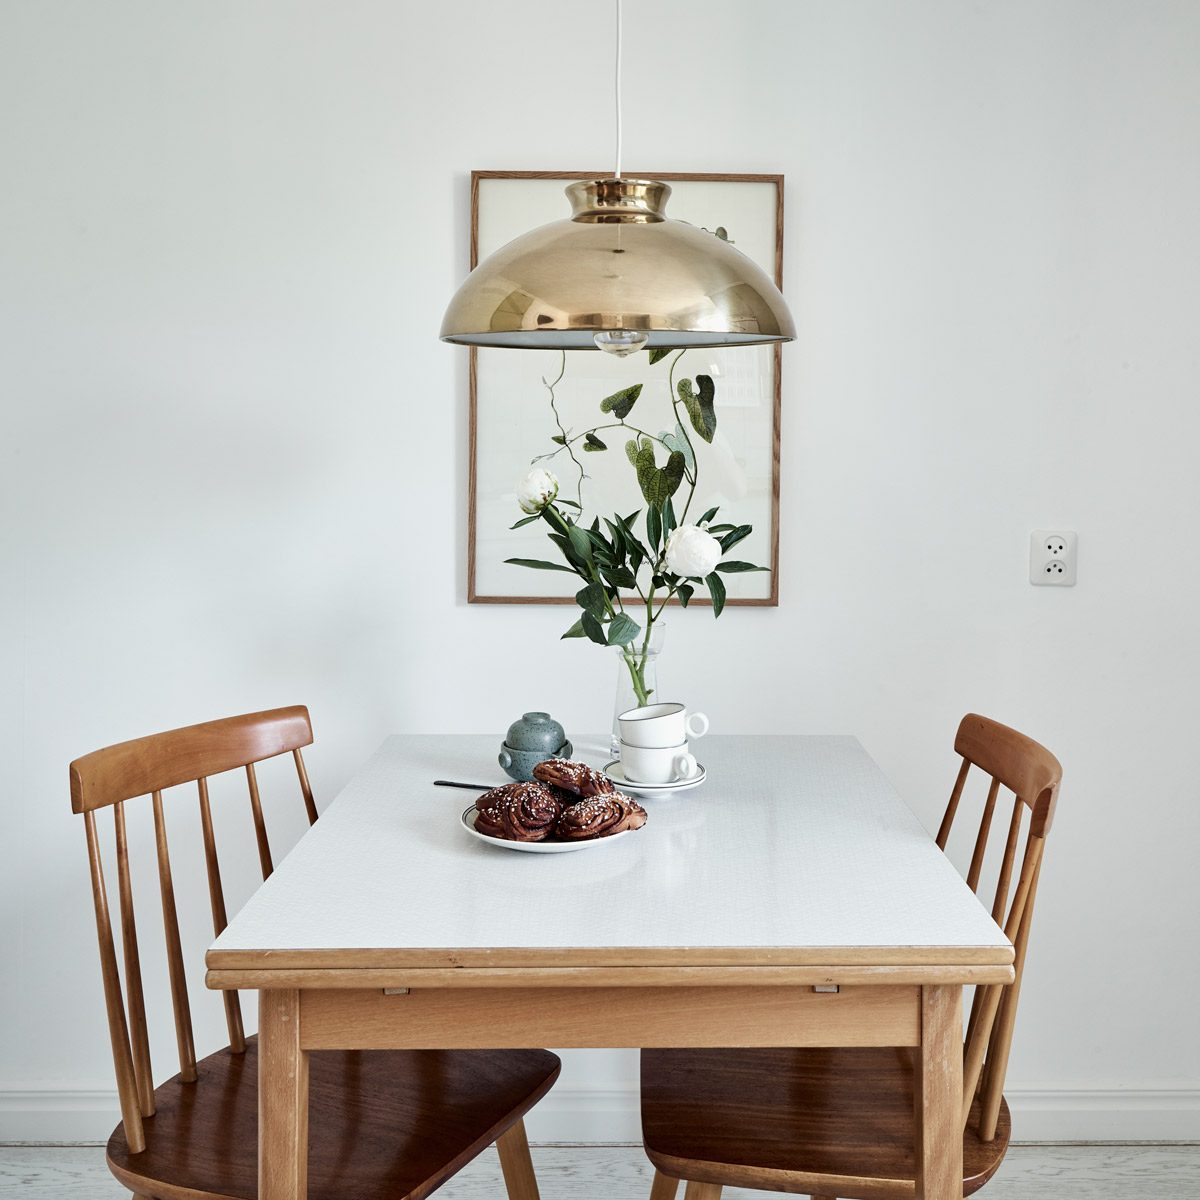 10 Best Kitchen And Dining Tables For Small Spaces